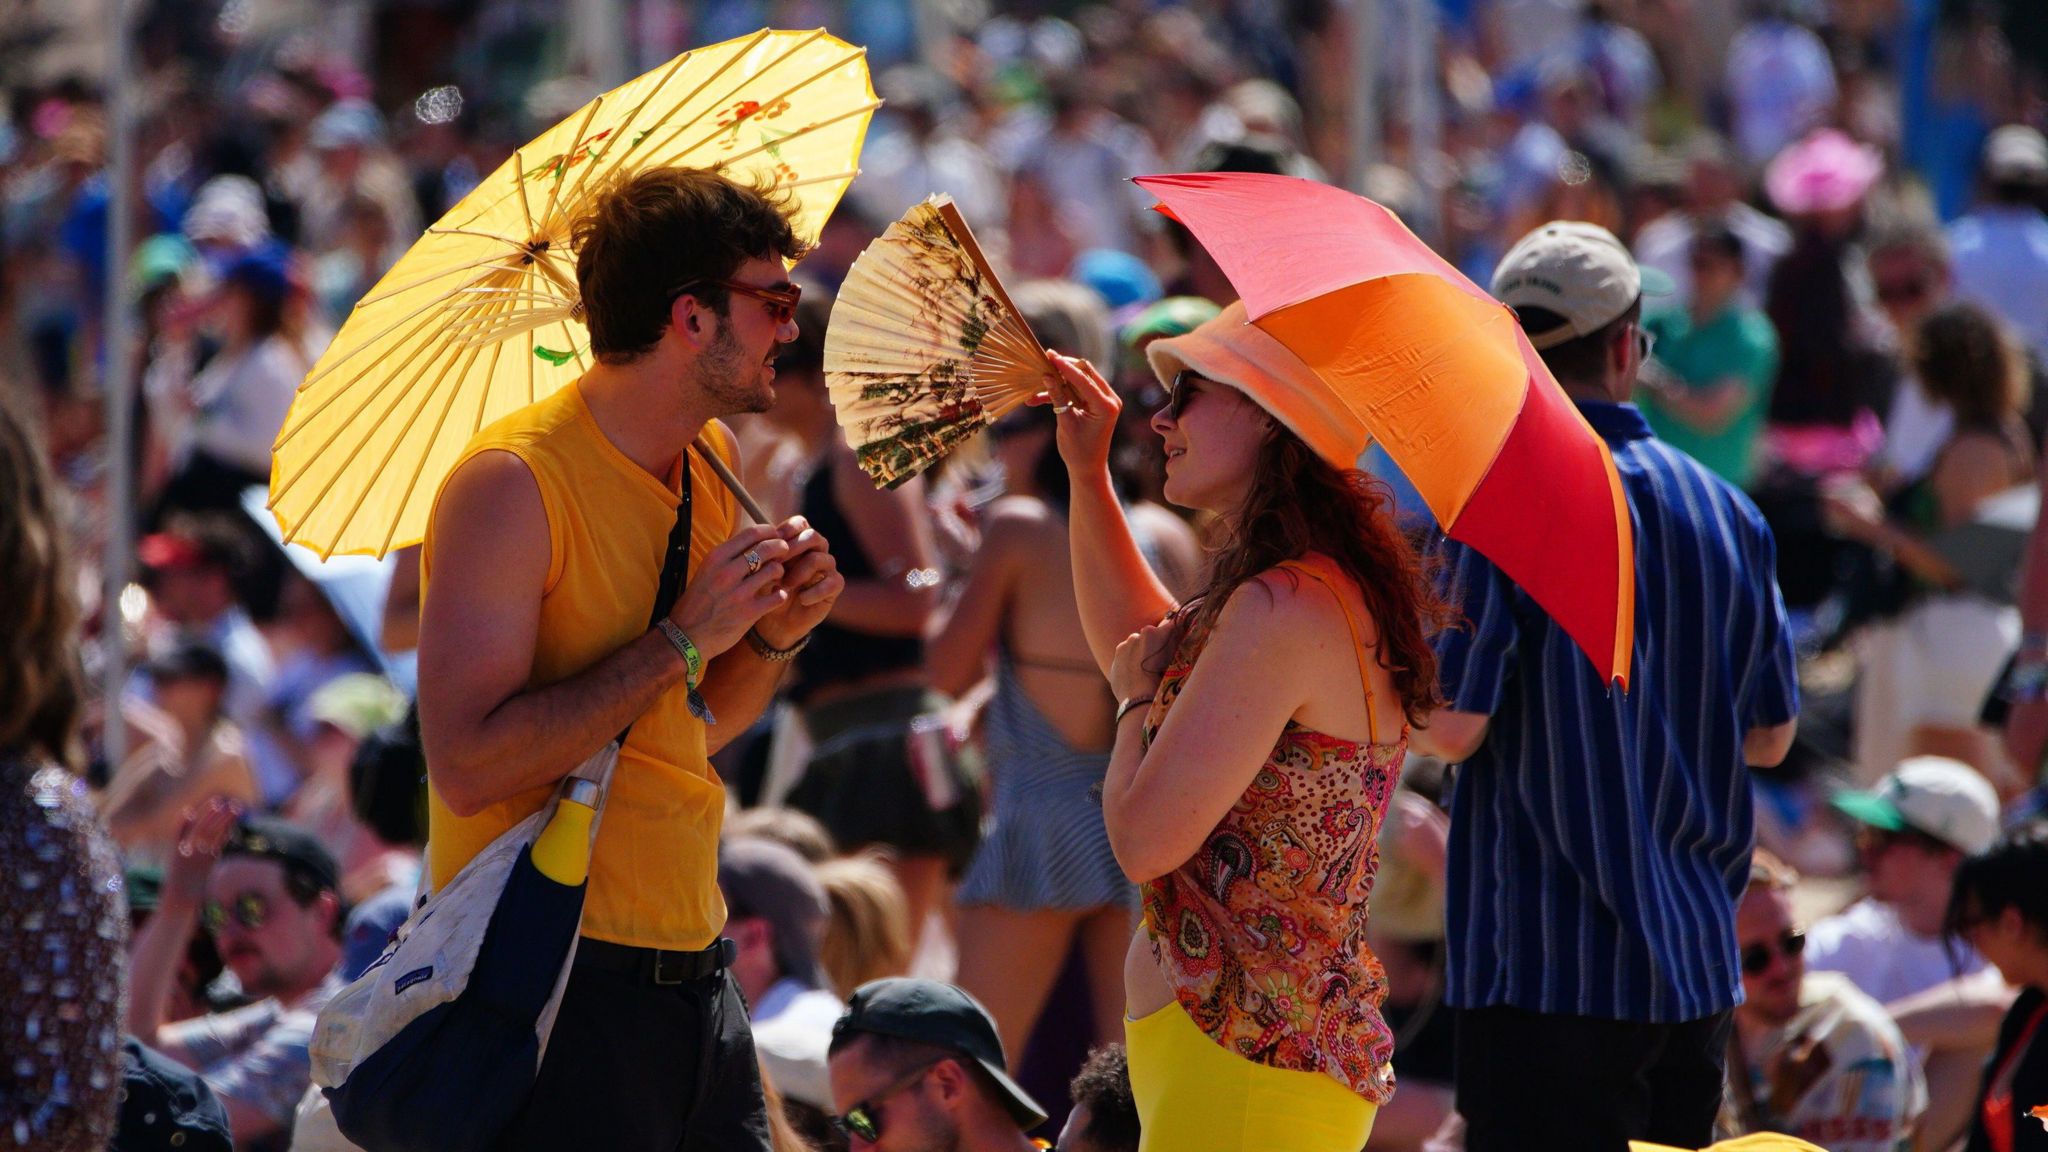 Image of a man and woman at Glastonbury Festival. They are holding sun parasols, wearing sunglasses and having a conversation. The woman is holding a fan.  